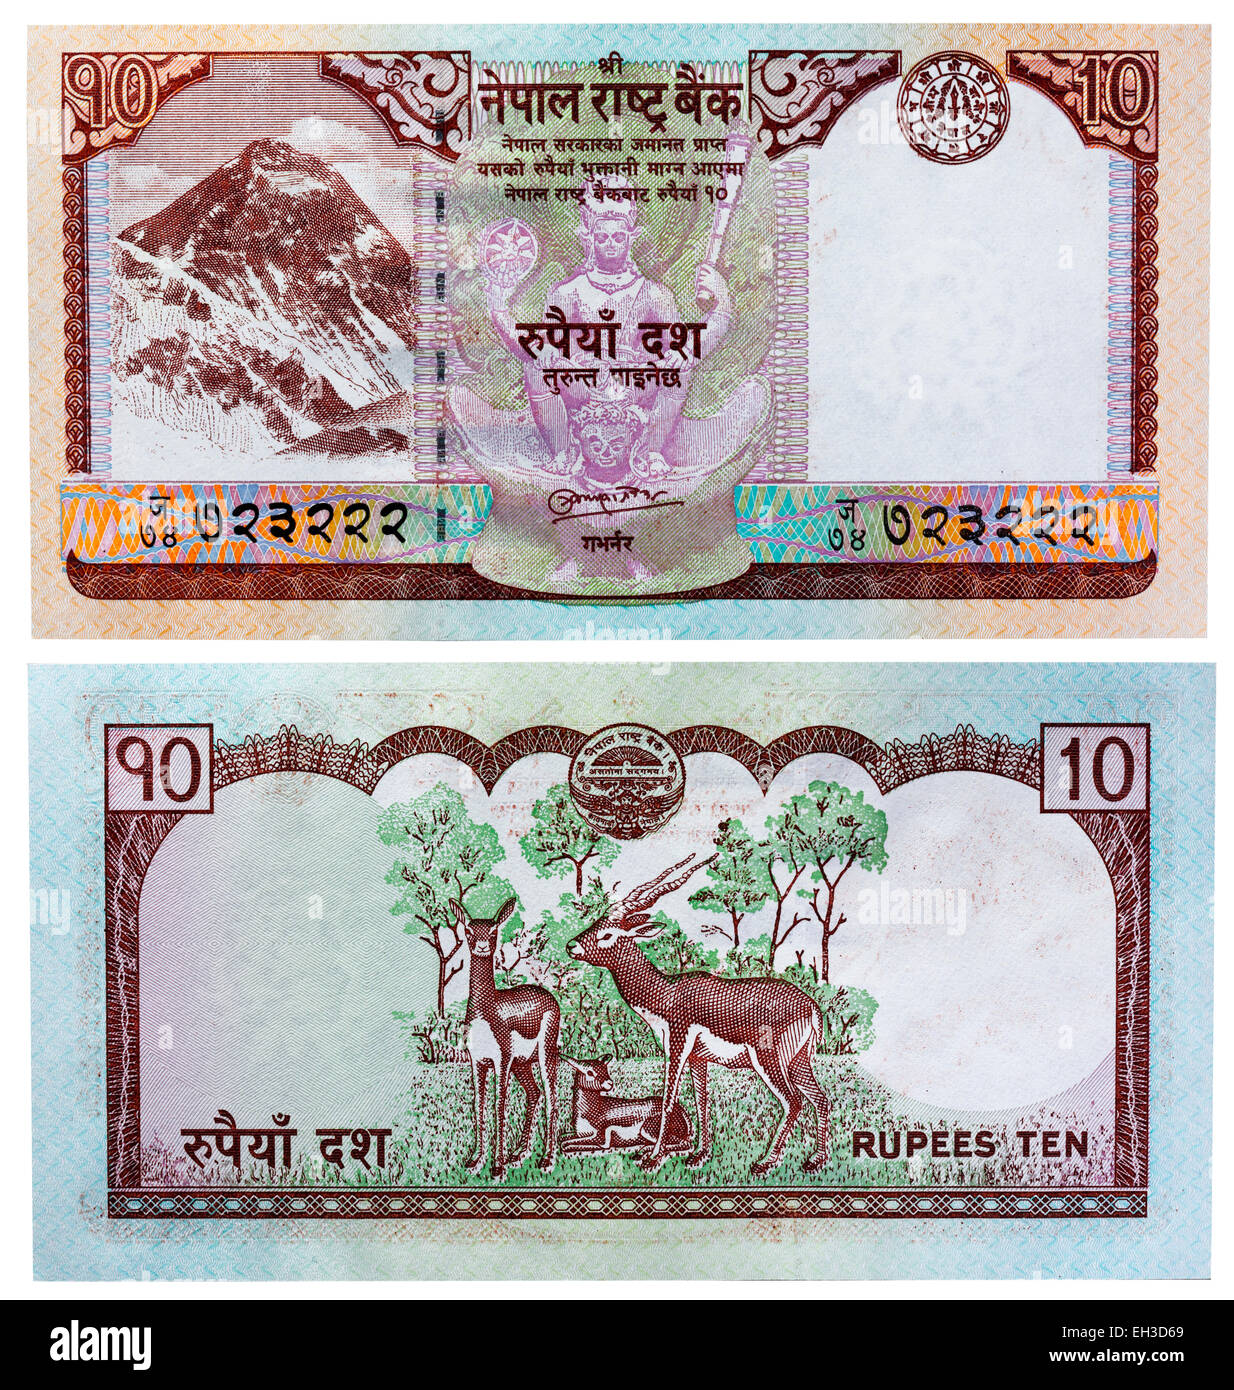 10 rupees banknote, Mount Everest and antelopes, Nepal, 2008 Stock Photo